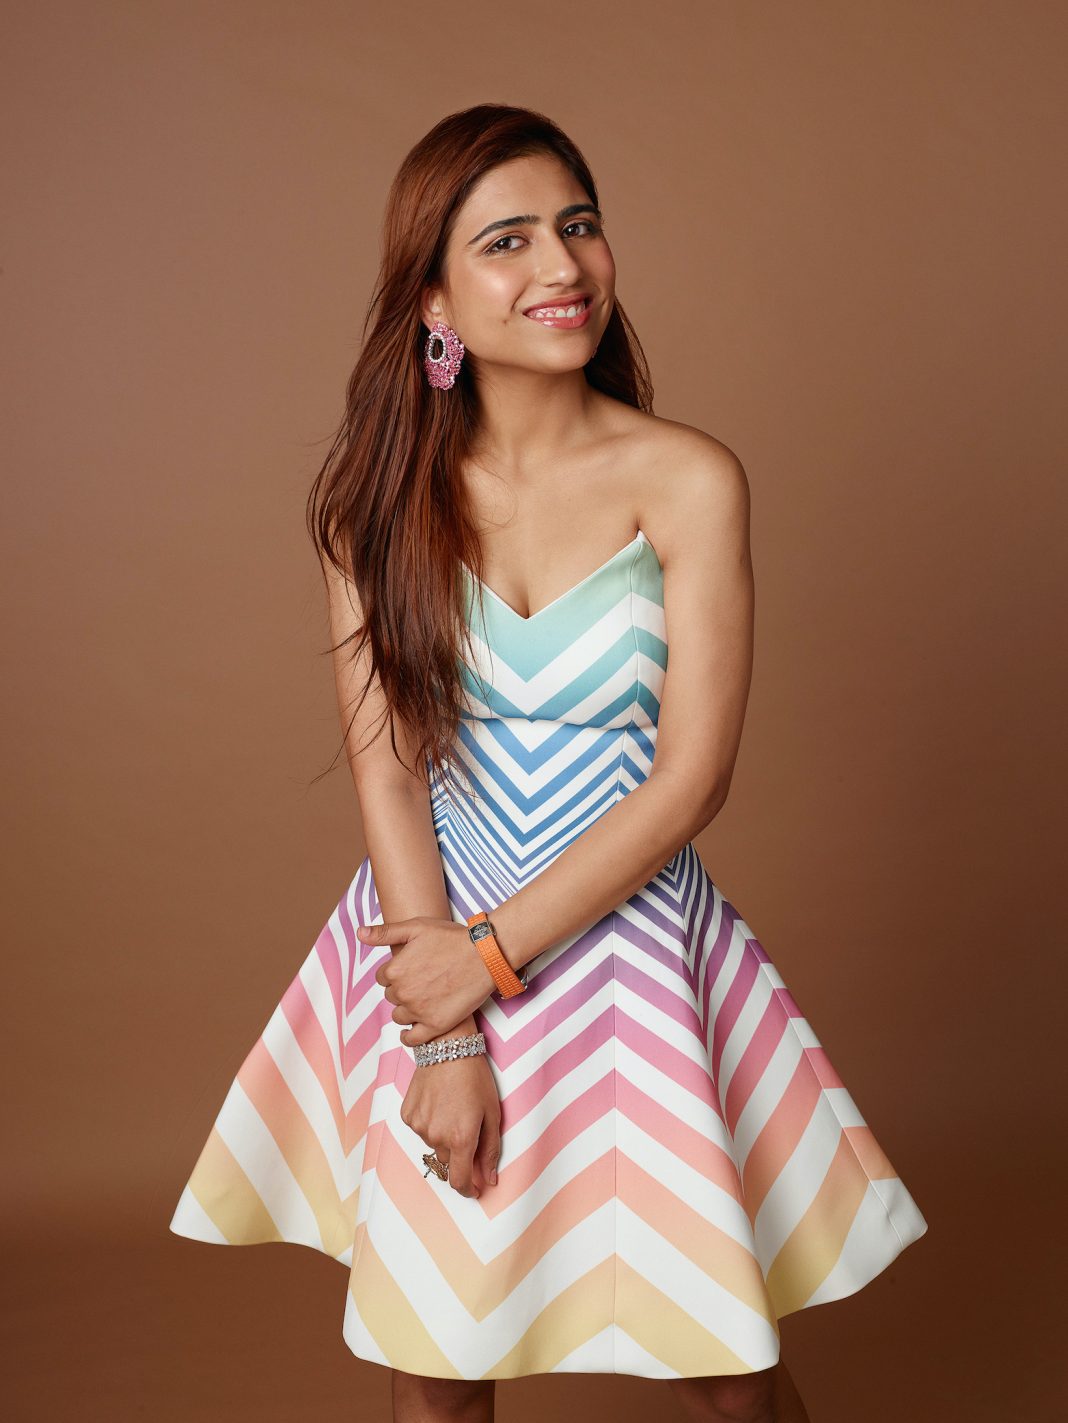 10 Female-Owned South Asian Brands You Need To Check Out: Supriya Lele.Photo Credit: www.localsamosa.com